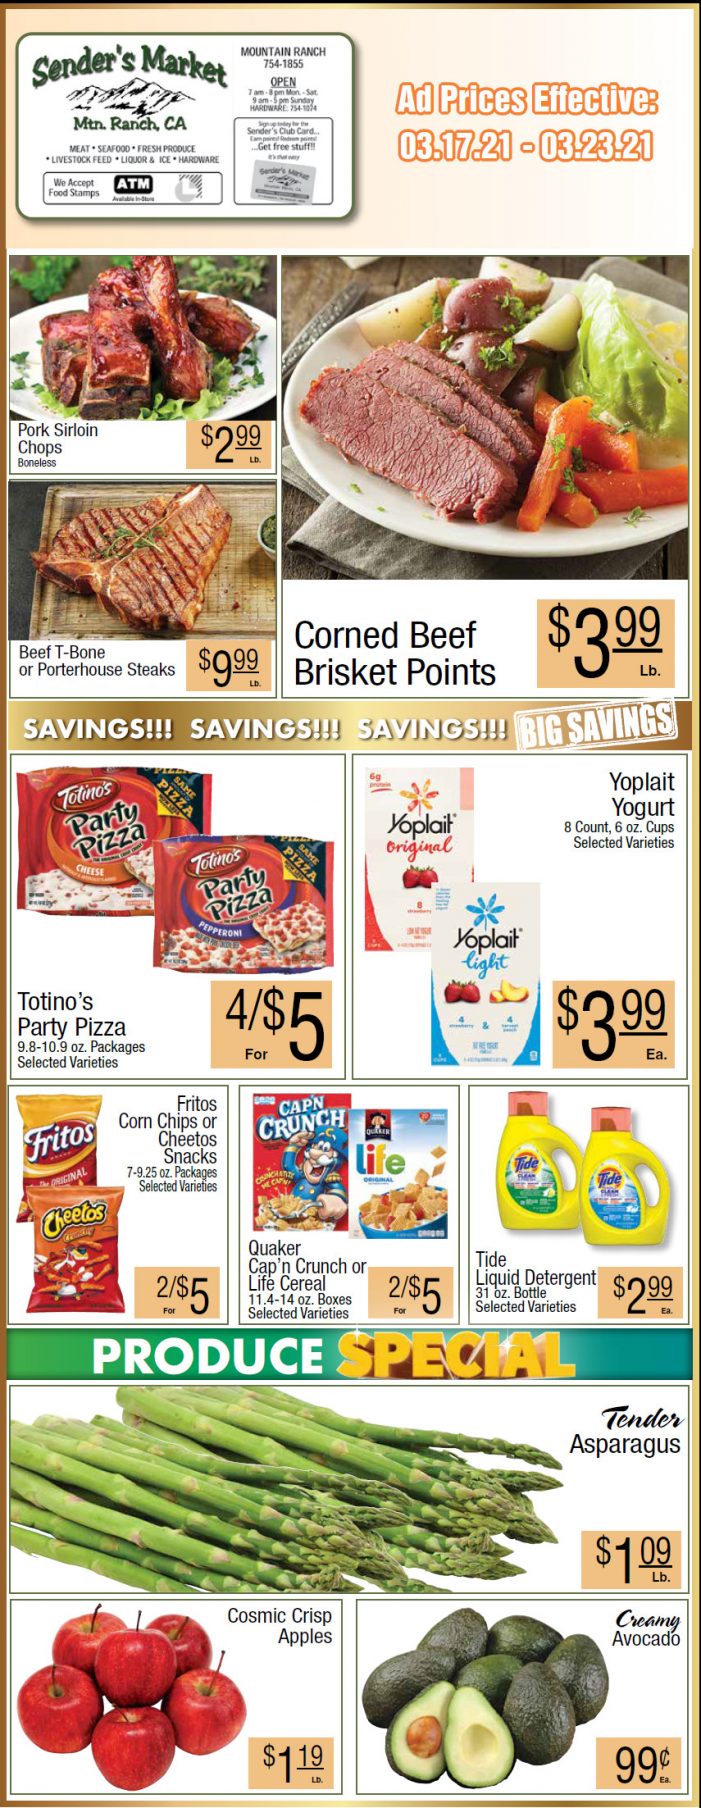 Sender’s Market’s Weekly Ad & Grocery Specials Through March 23rd.  Shop Local & Save!